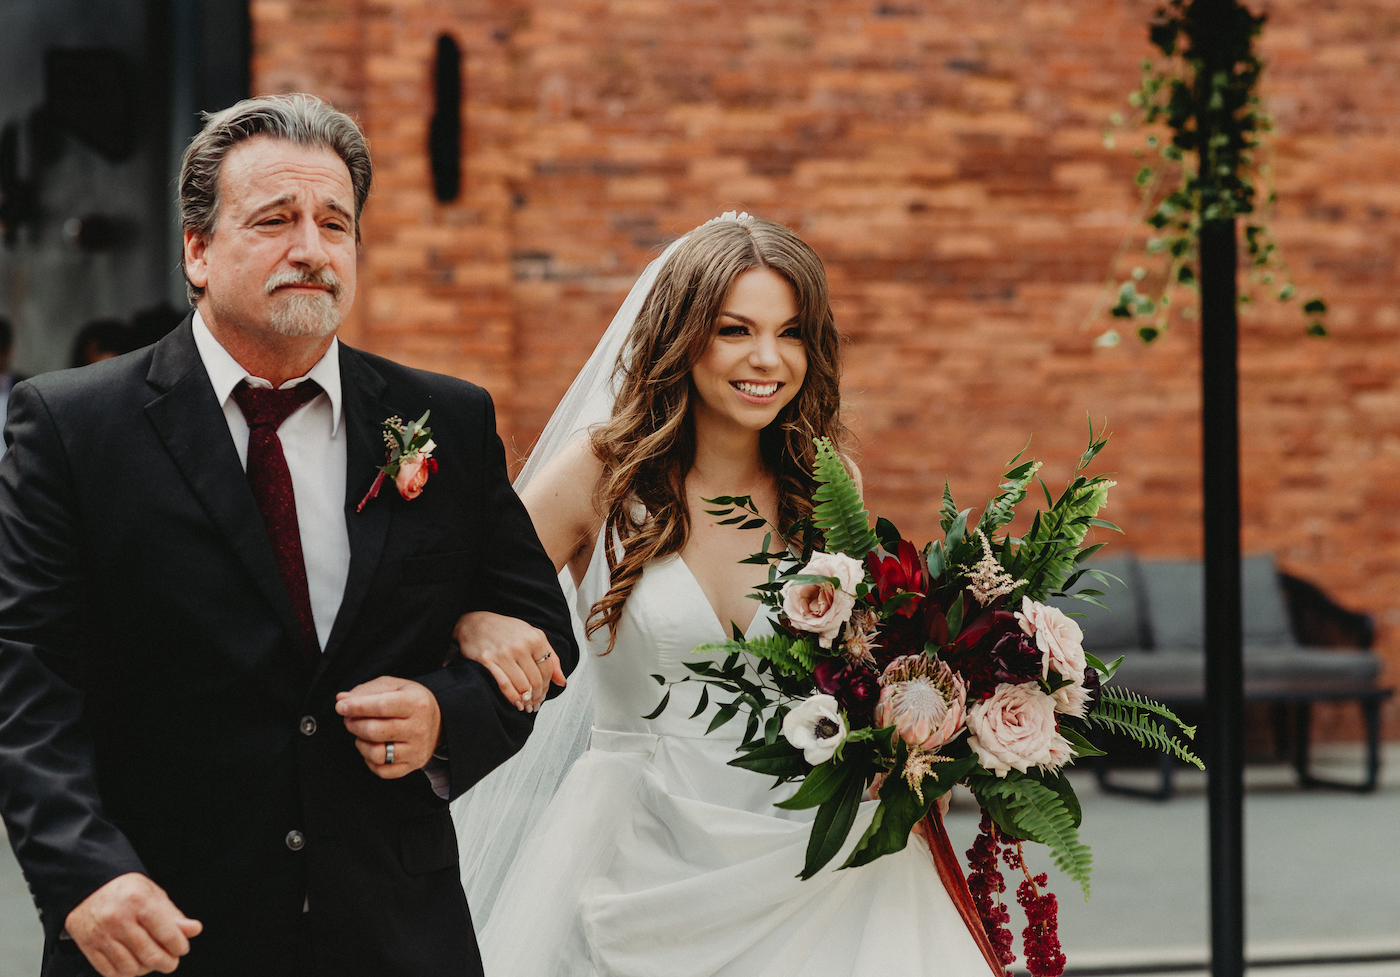 Bride Walking Down Aisle with Father during Outdoor Tampa Wedding | Wild Boho Loose Organic Greenery Bridal Bouquet with Ferns Blush Pink Roses and Protea and Red Amaranthus | Dewitt for Love Photography